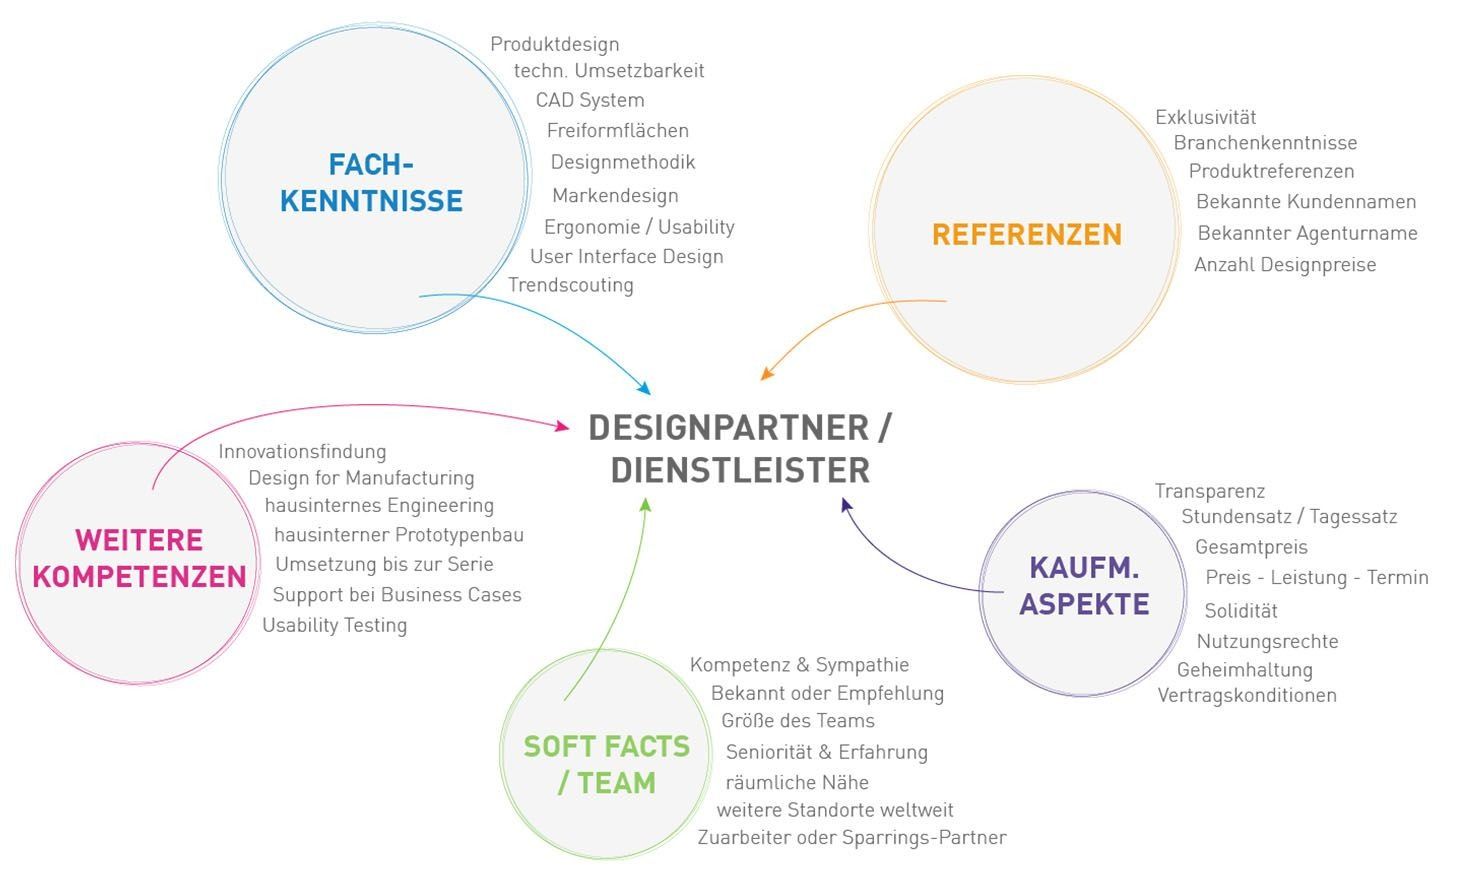 Graphics about design partners and service providers